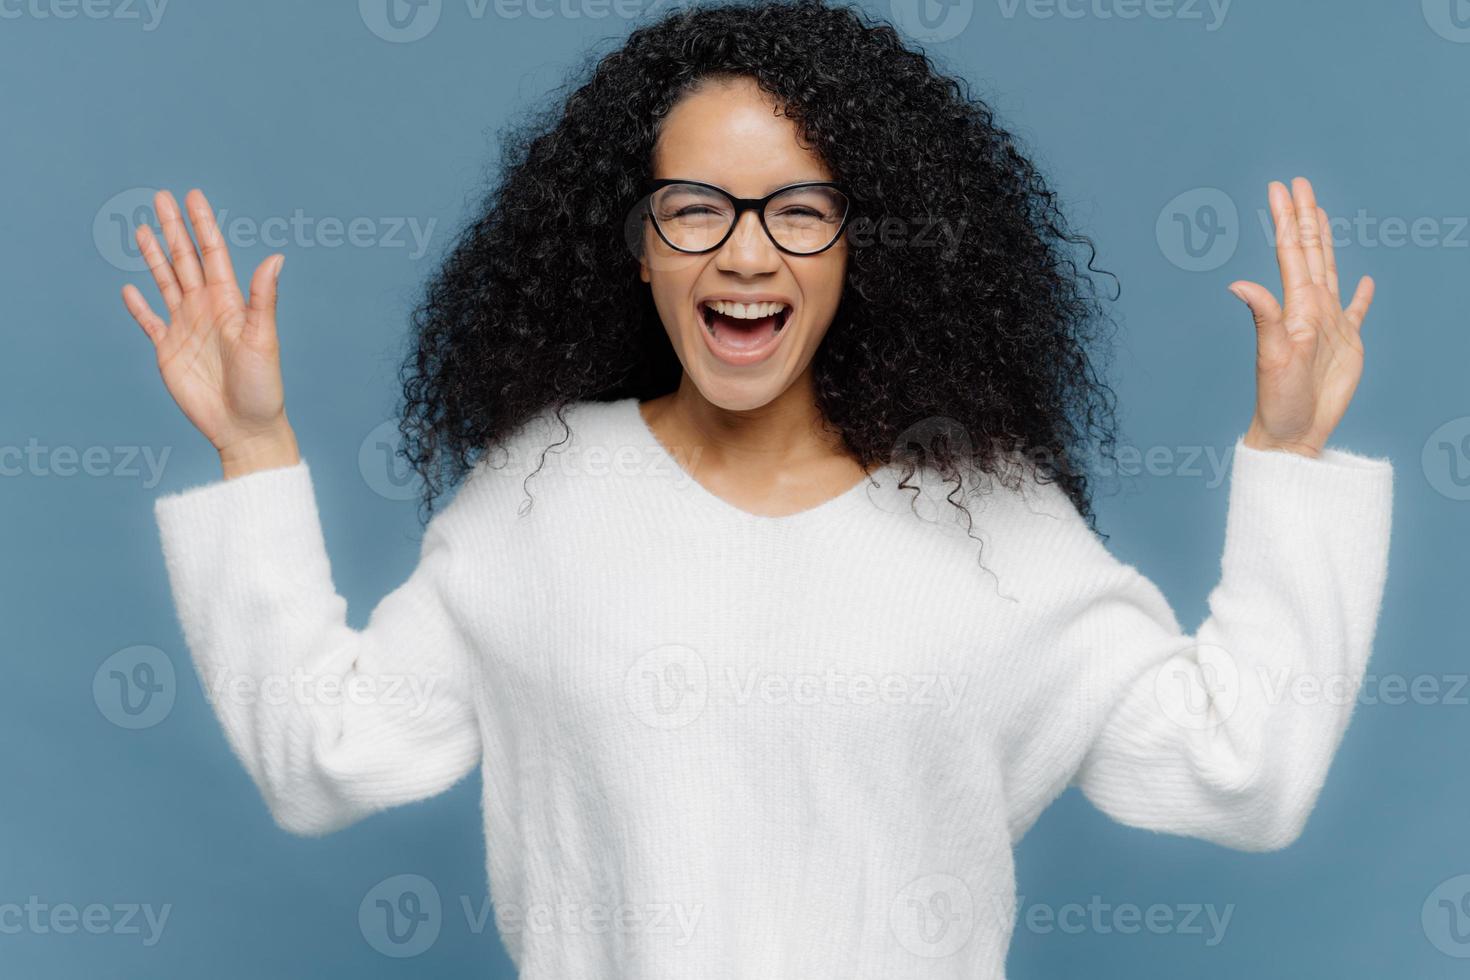 Overjoyed mixed race woman with curly hair, raises hands, exclaims from positive emotions, keeps mouth opened, dressed in white sweater, stands against blue background. Facial expressions concept photo